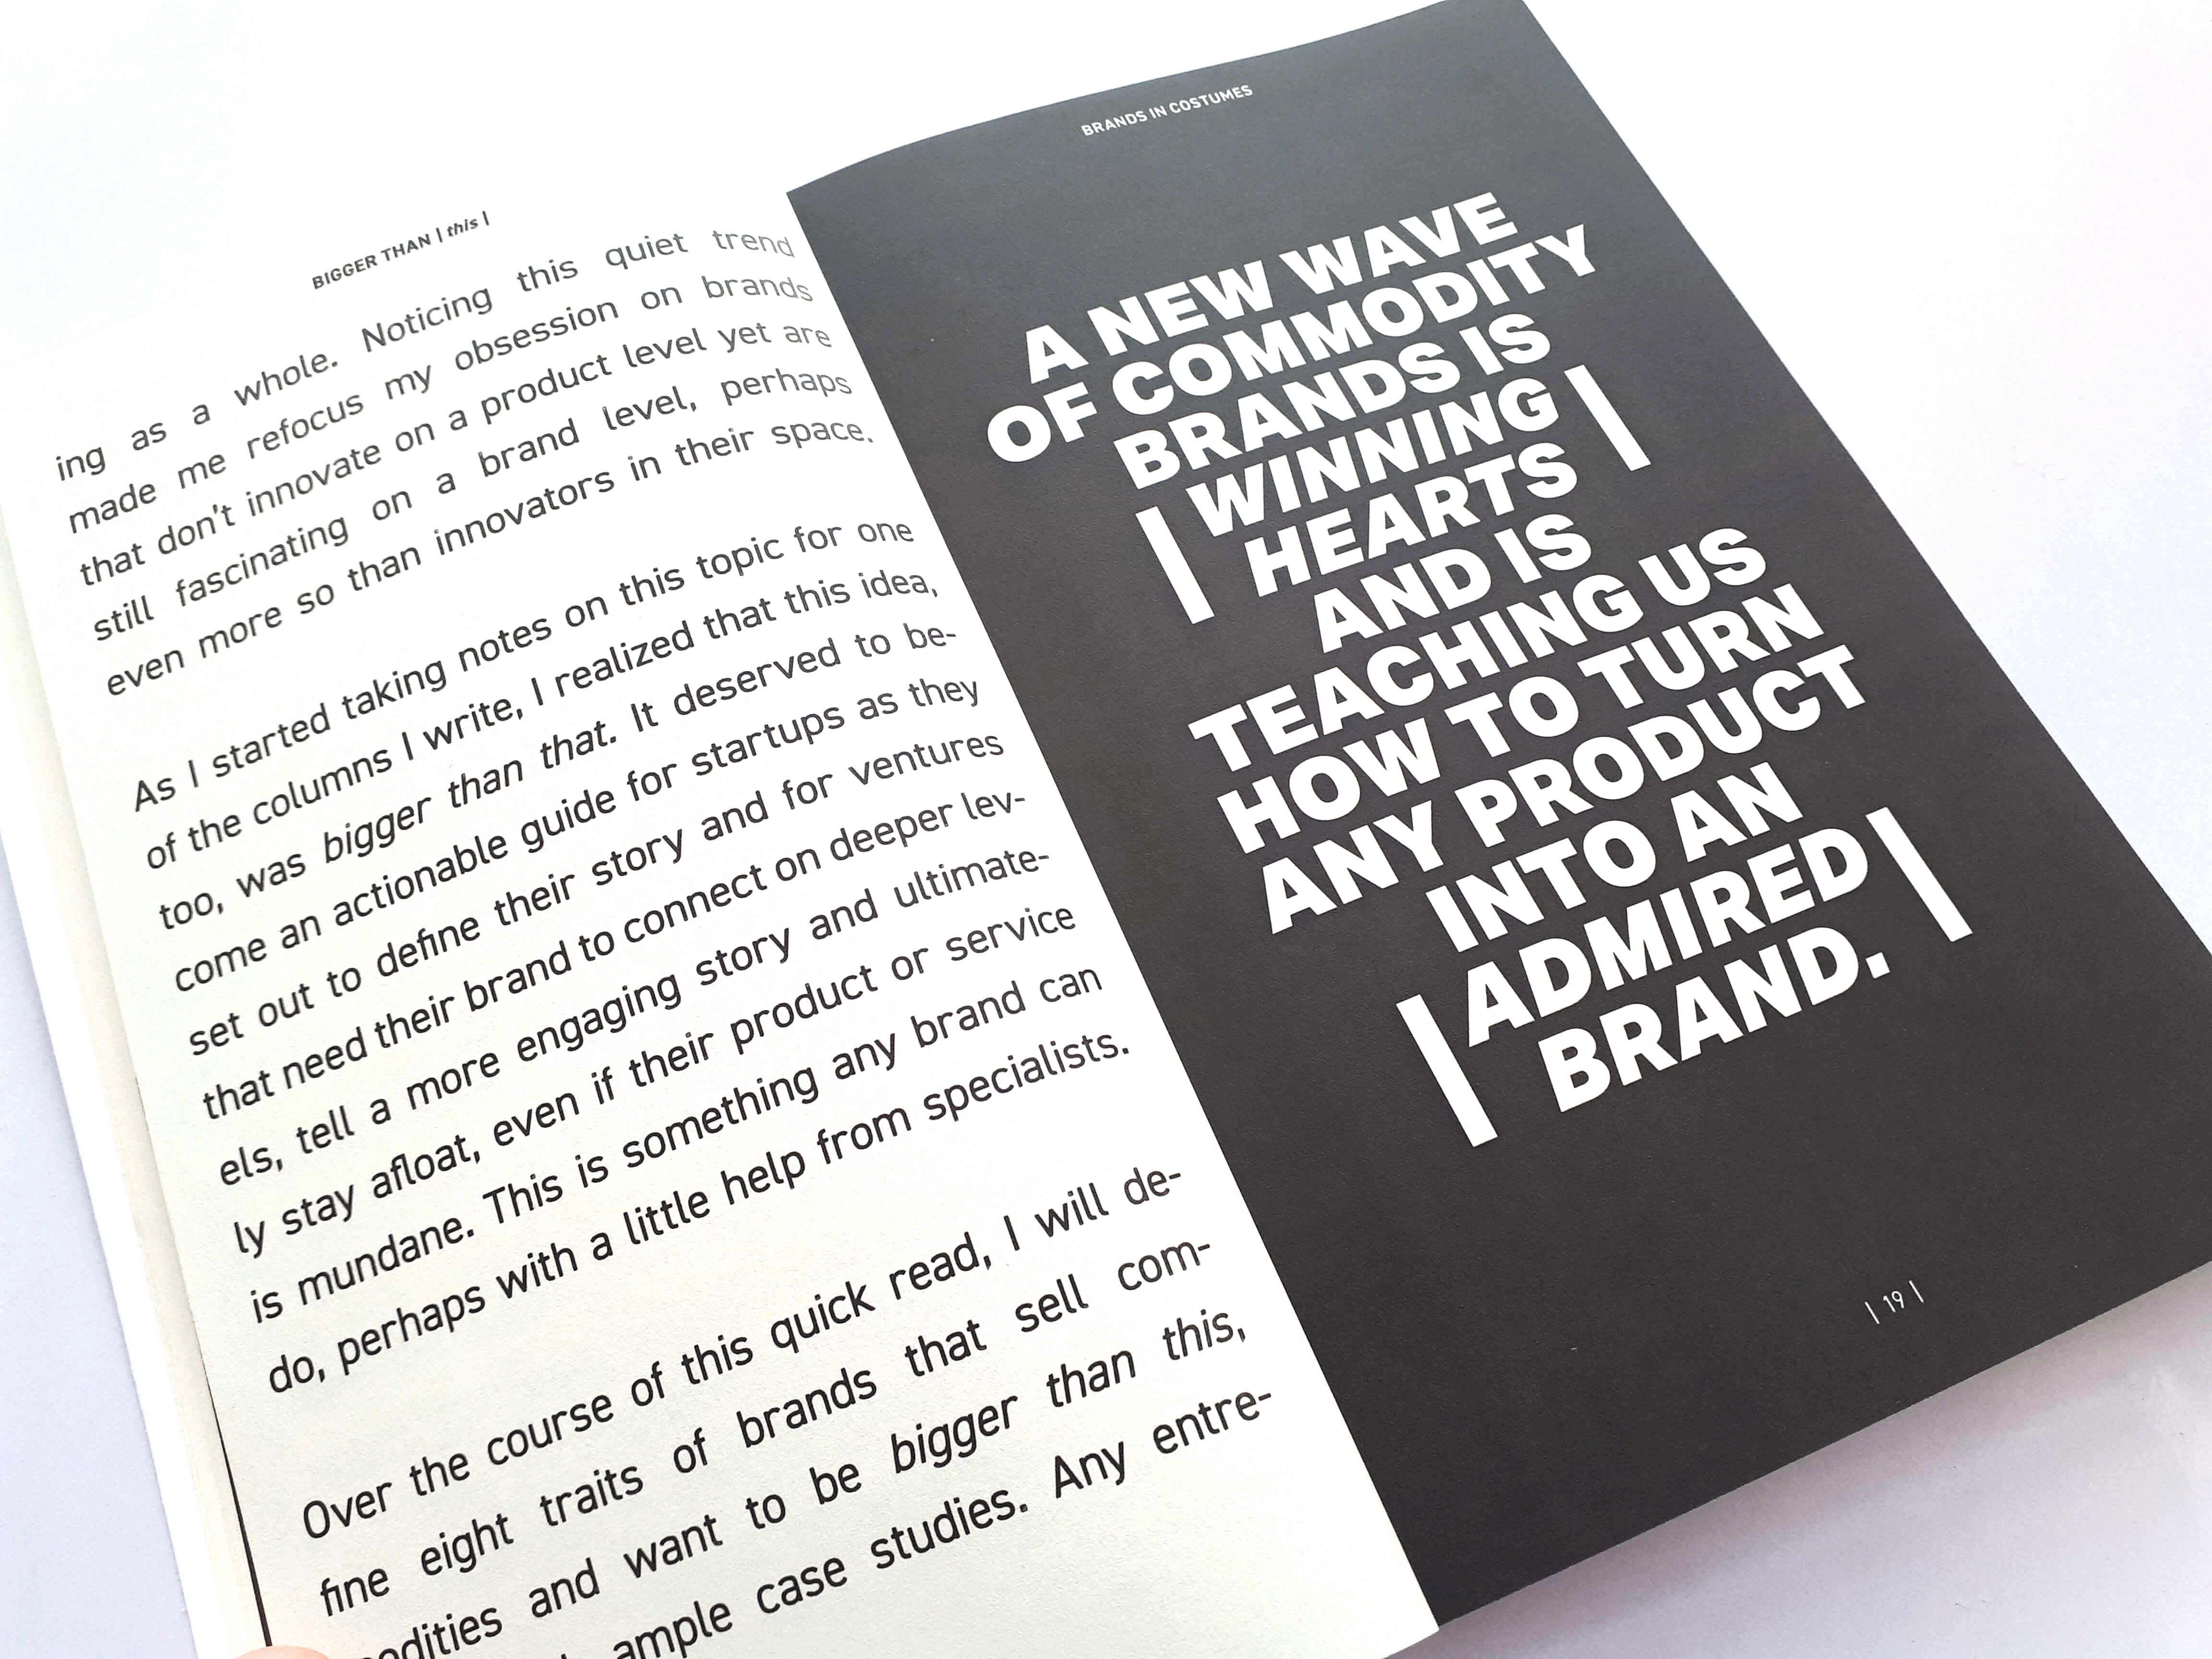 Bigger Than This: How to Turn Any Venture Into an Admired Brand by Fabian Geyrhalter